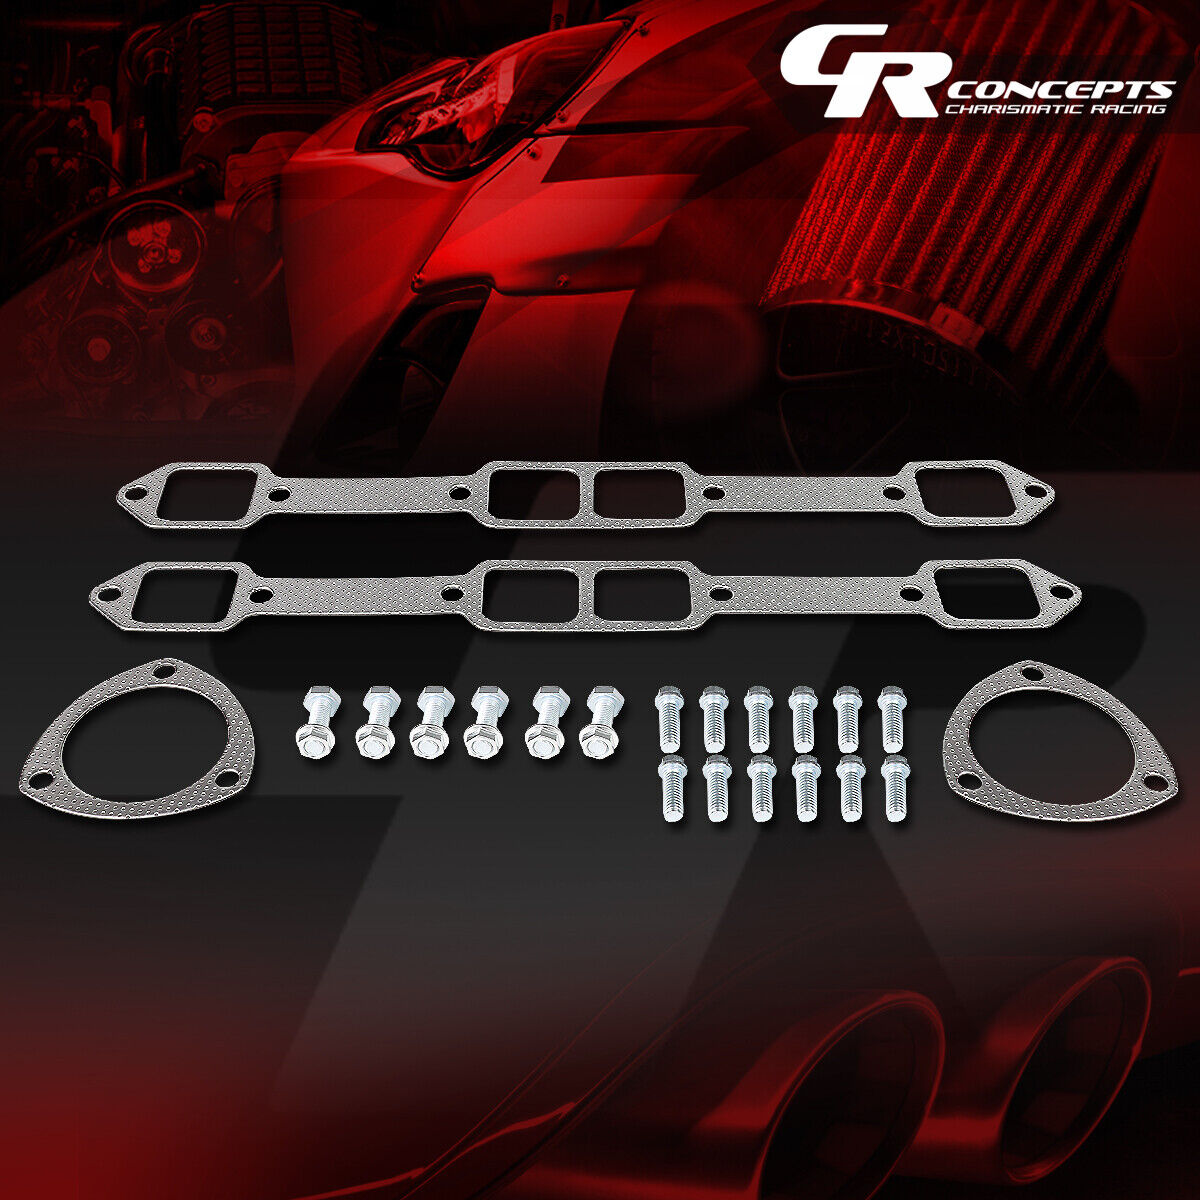 EXHAUST MANIFOLD HEADER GASKET COMPLETE SET FOR 62-78 CHARGER SATELLITE NEWPORT